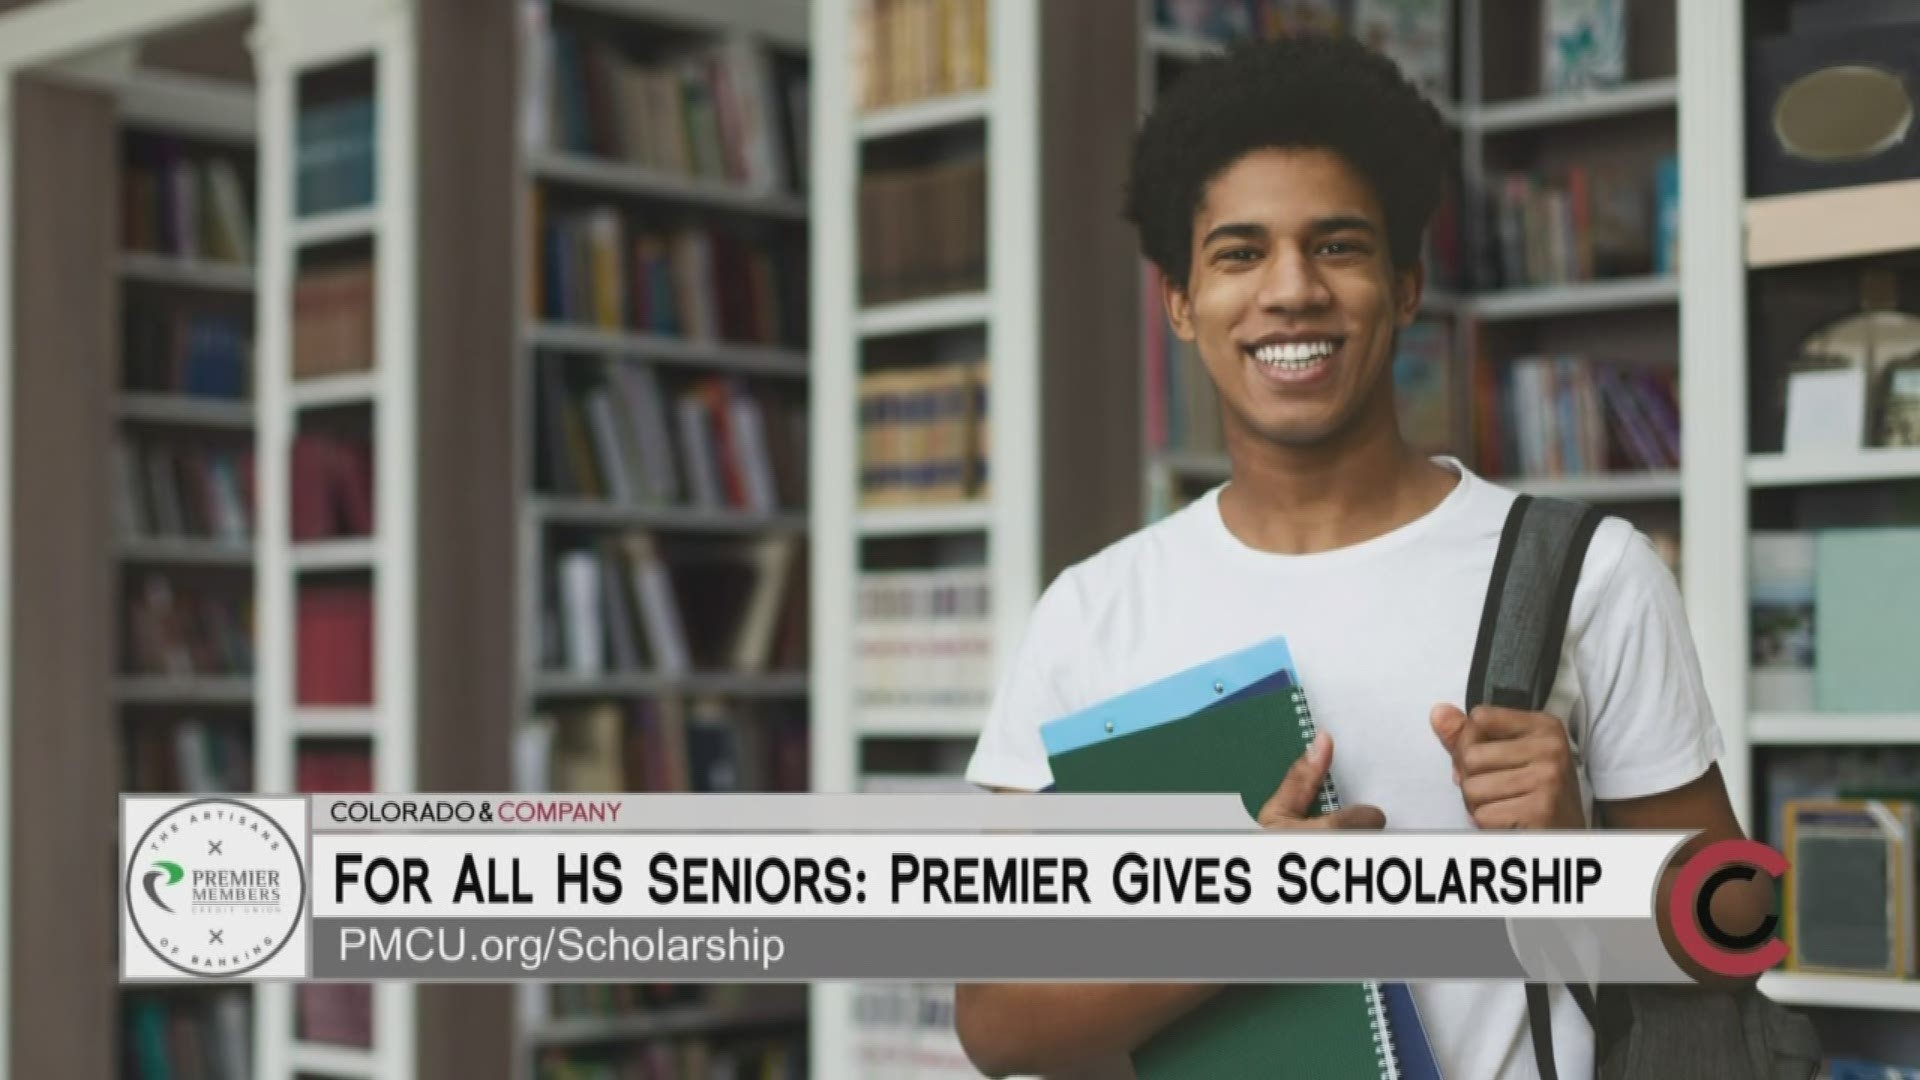 The Premier Scholarship is more about gumption than grades. Check out PMCU.org/Scholarship to learn more.